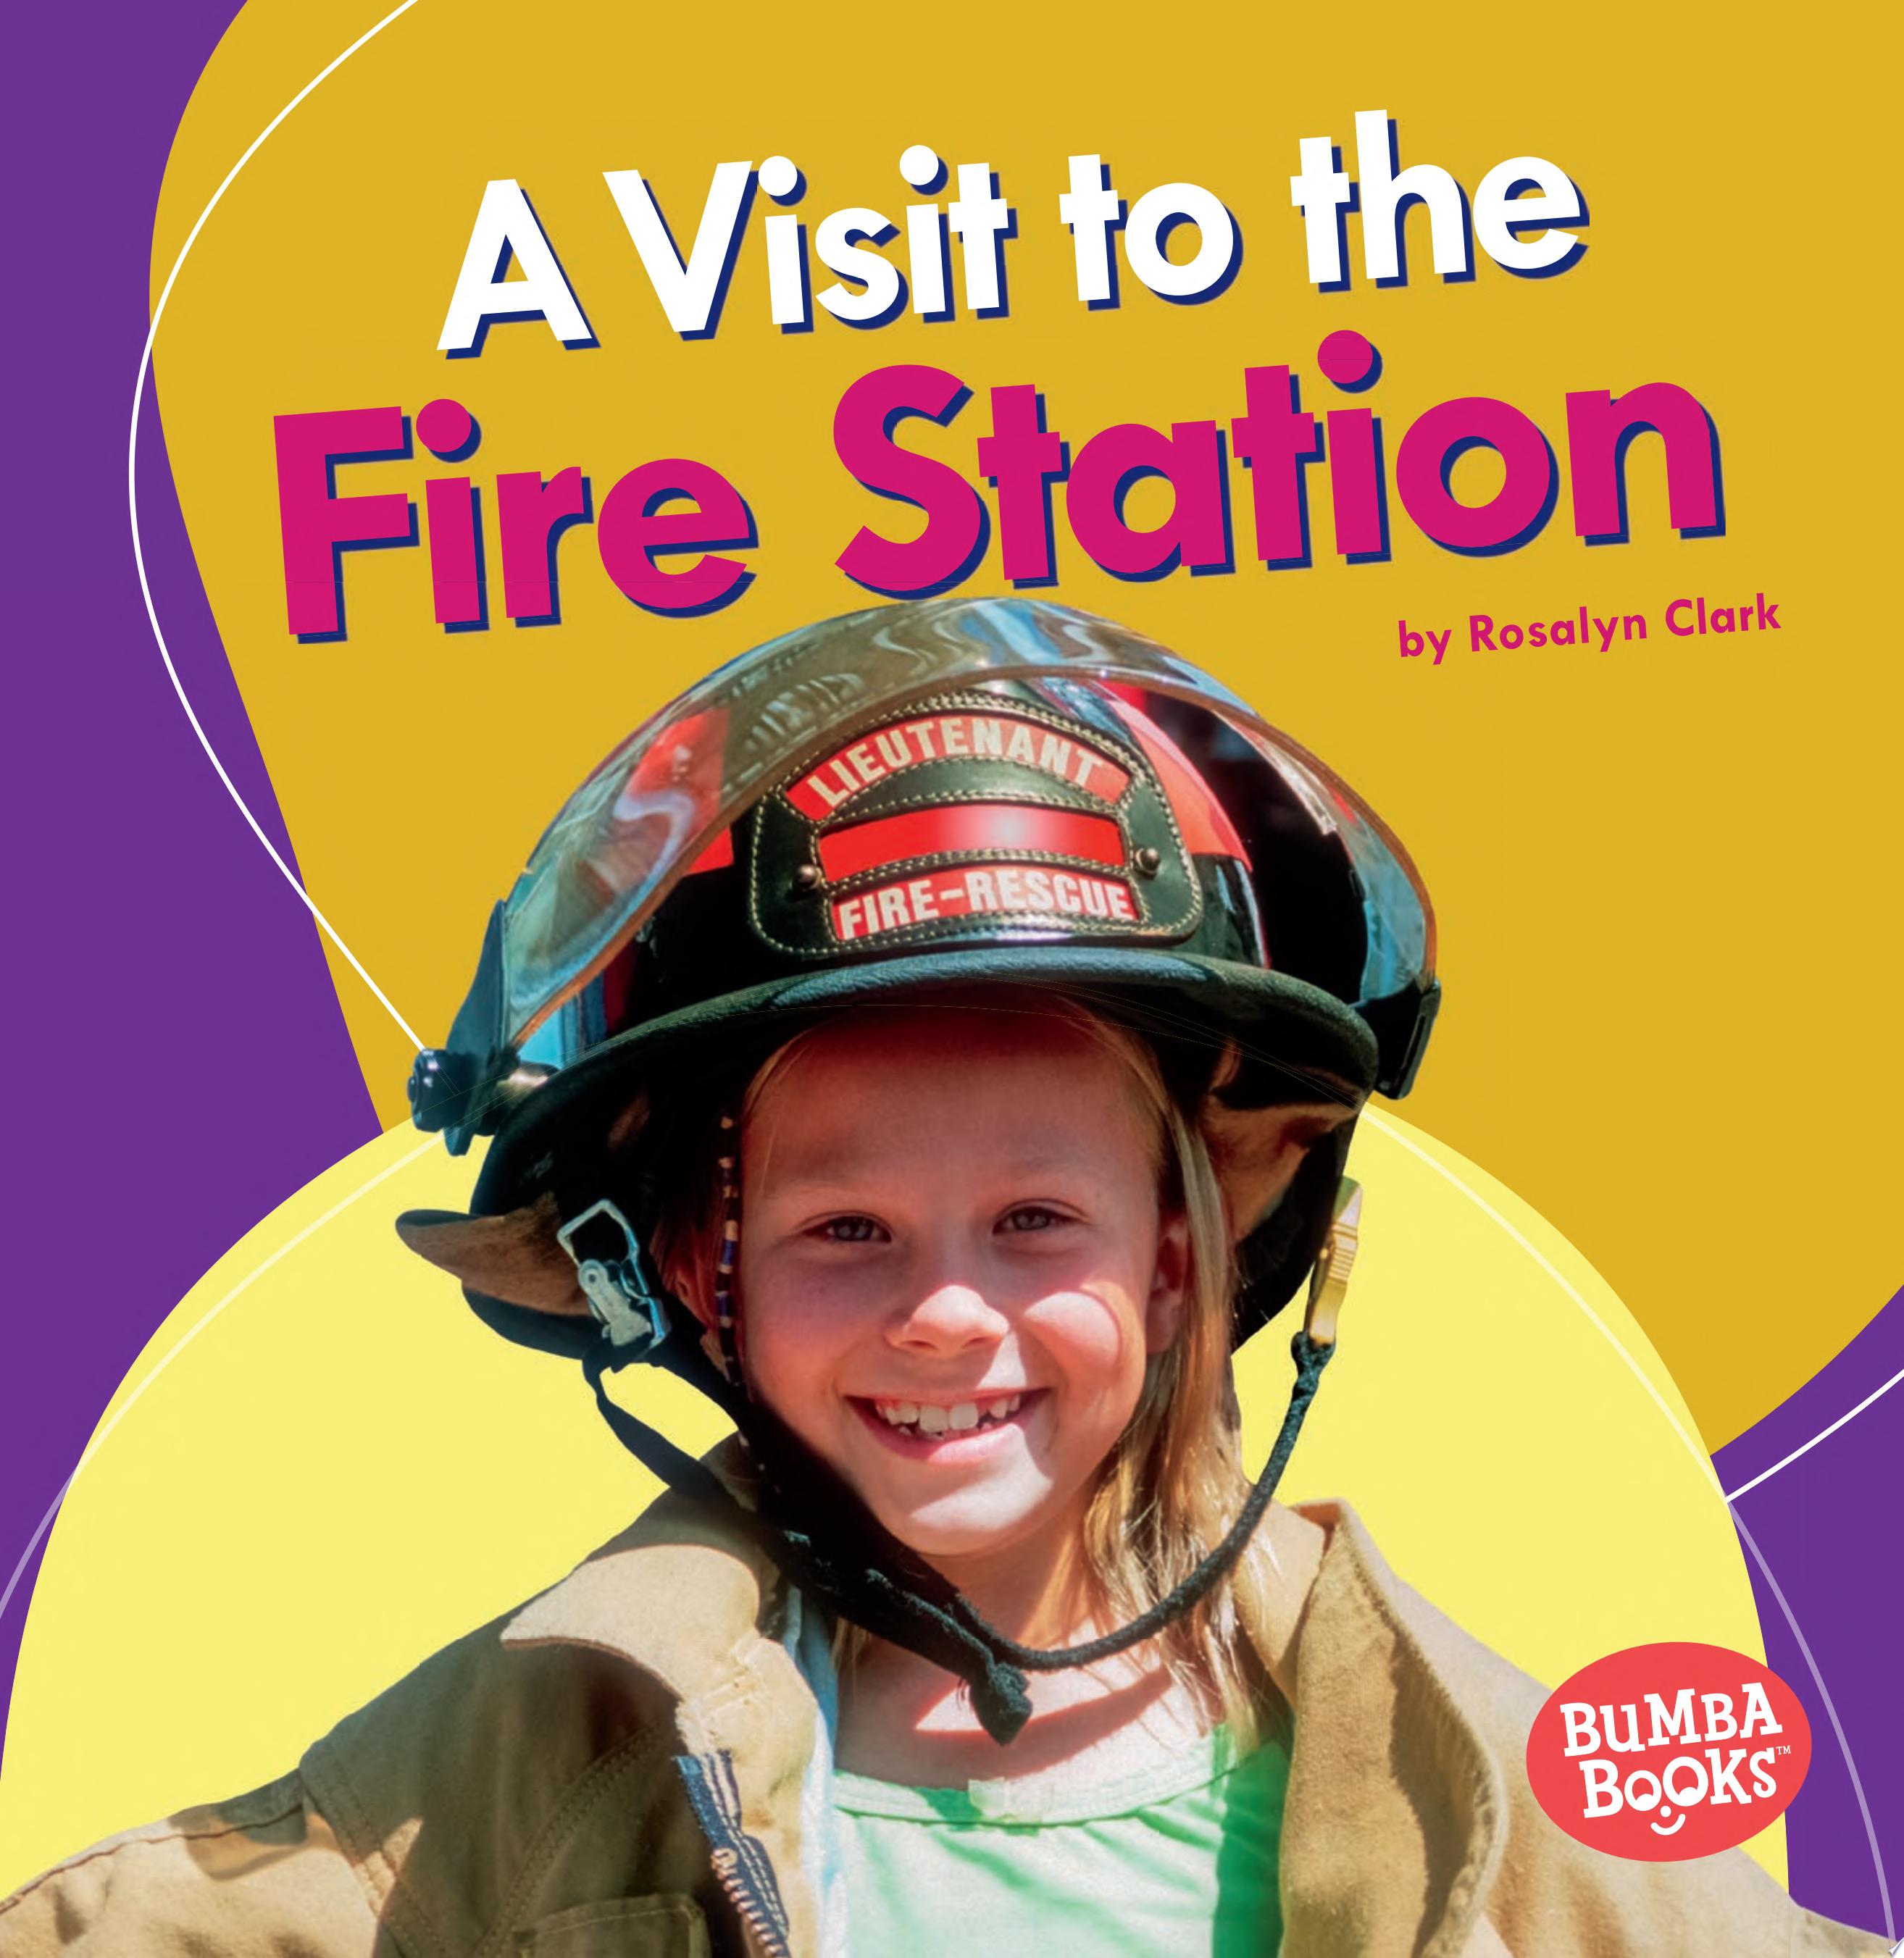 Image for "A Visit to the Fire Station"